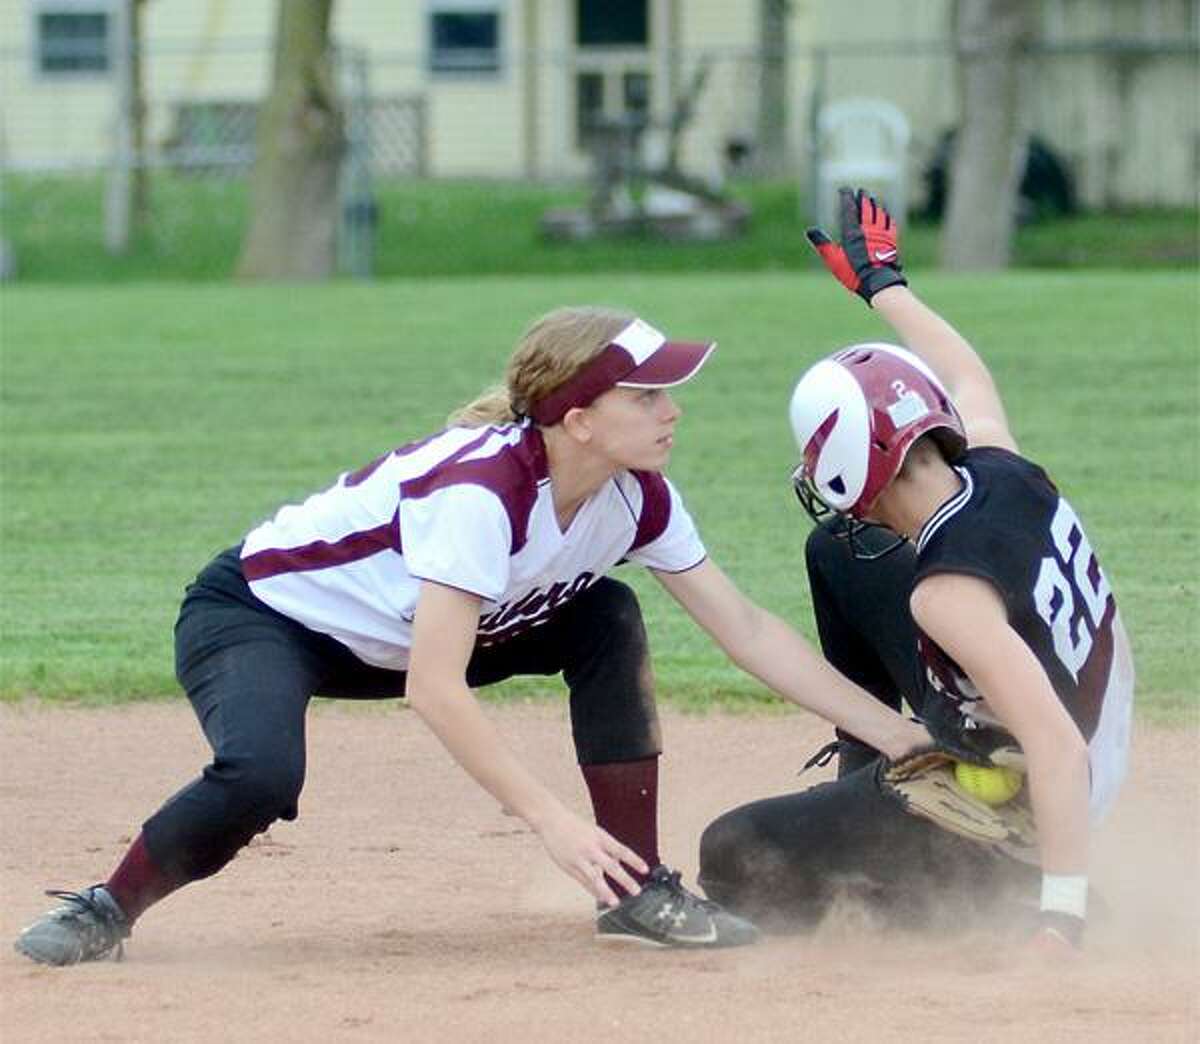 Dispatch Staff Photo by DAVID M. JOHNSONCanastotaÕs Sam McCarthy, left, tags out Sherburne-EarlvilleÕs Kayla Nelson as she tries to steal second base in a CSC contest in Canastota on Monday, May 14, 2012. The game was not reported by press time.